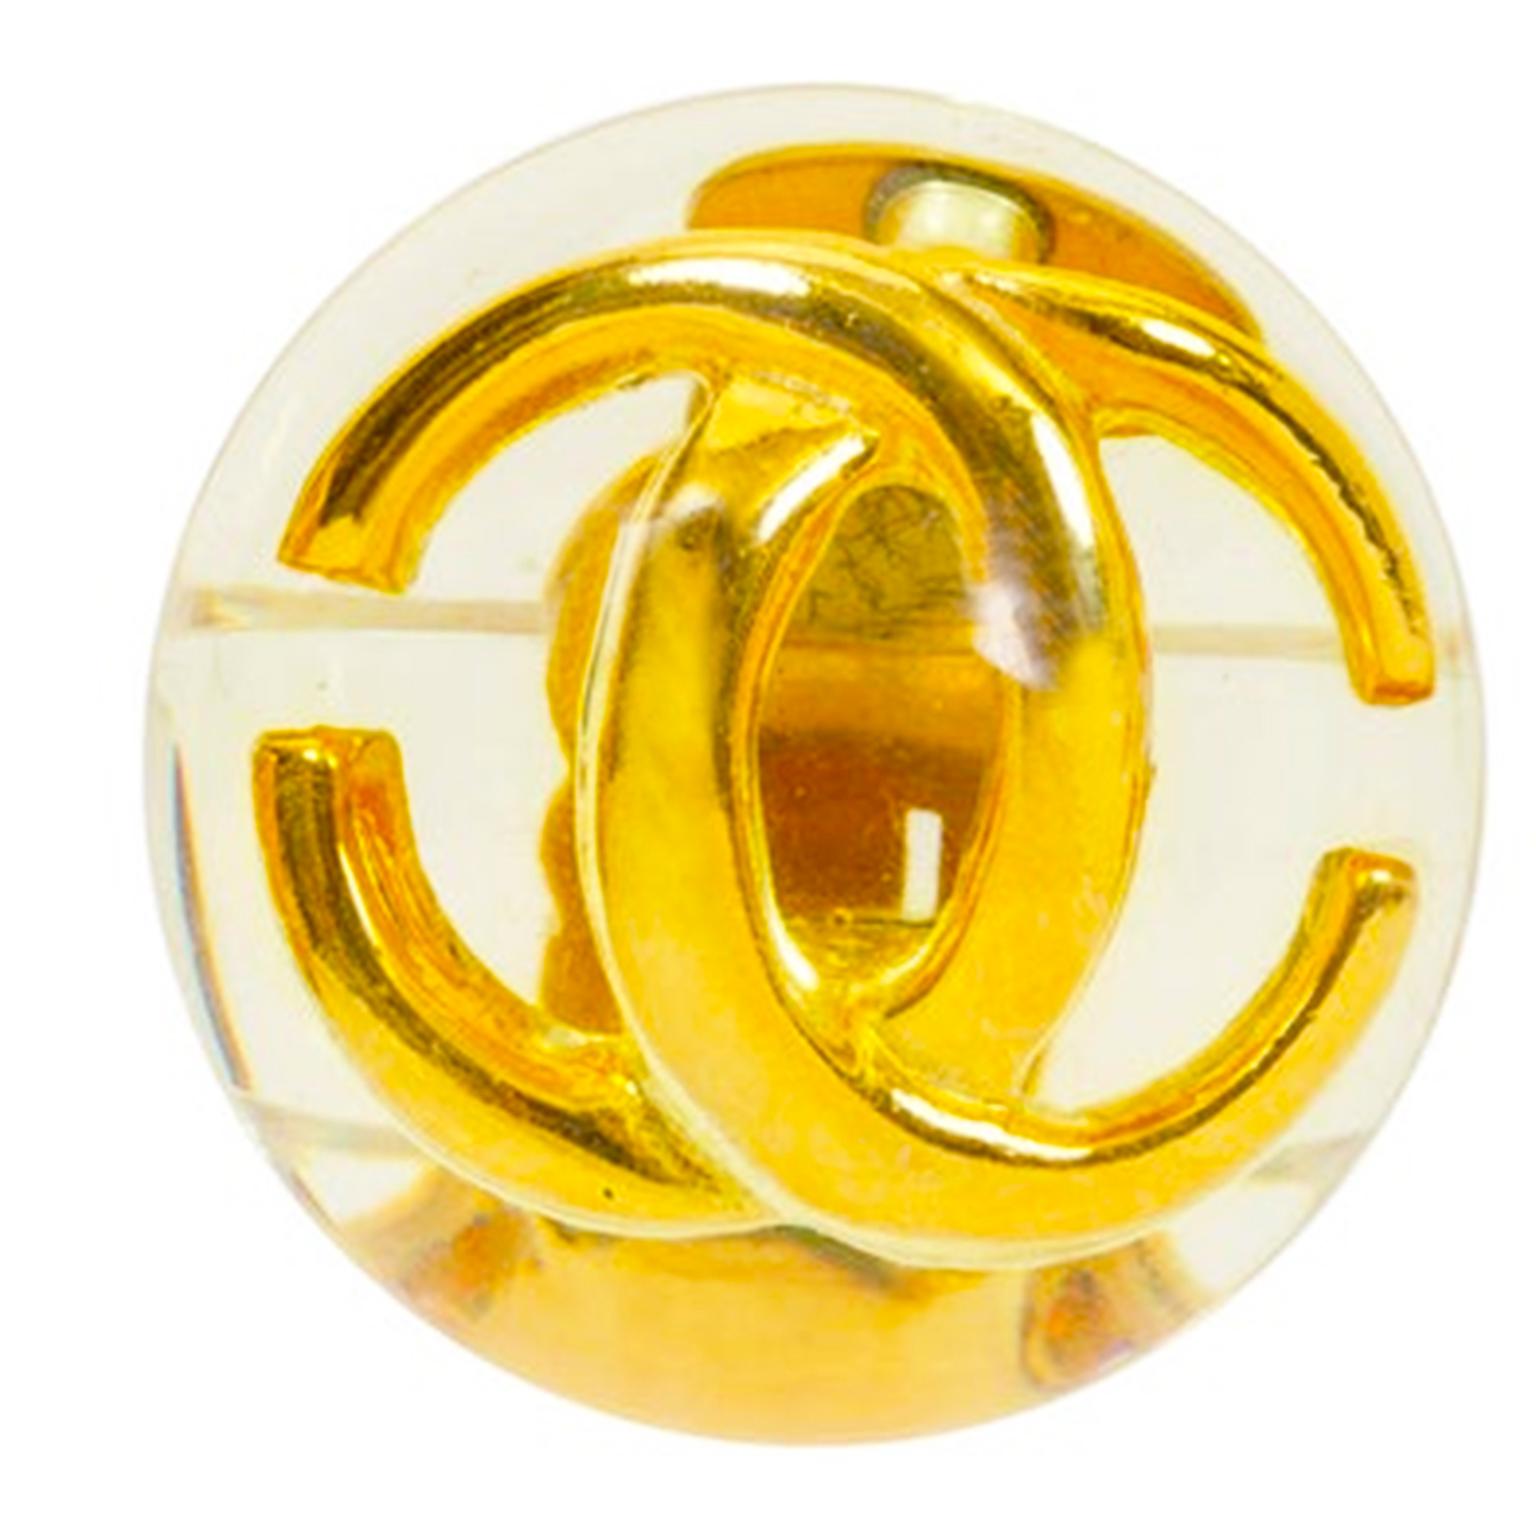 These are stunning vintage 1980's Chanel earrings with lucite domes over gold CC logos. These vintage Chanel Collection 25 by Victoire de Castellane earrings measure 1.5